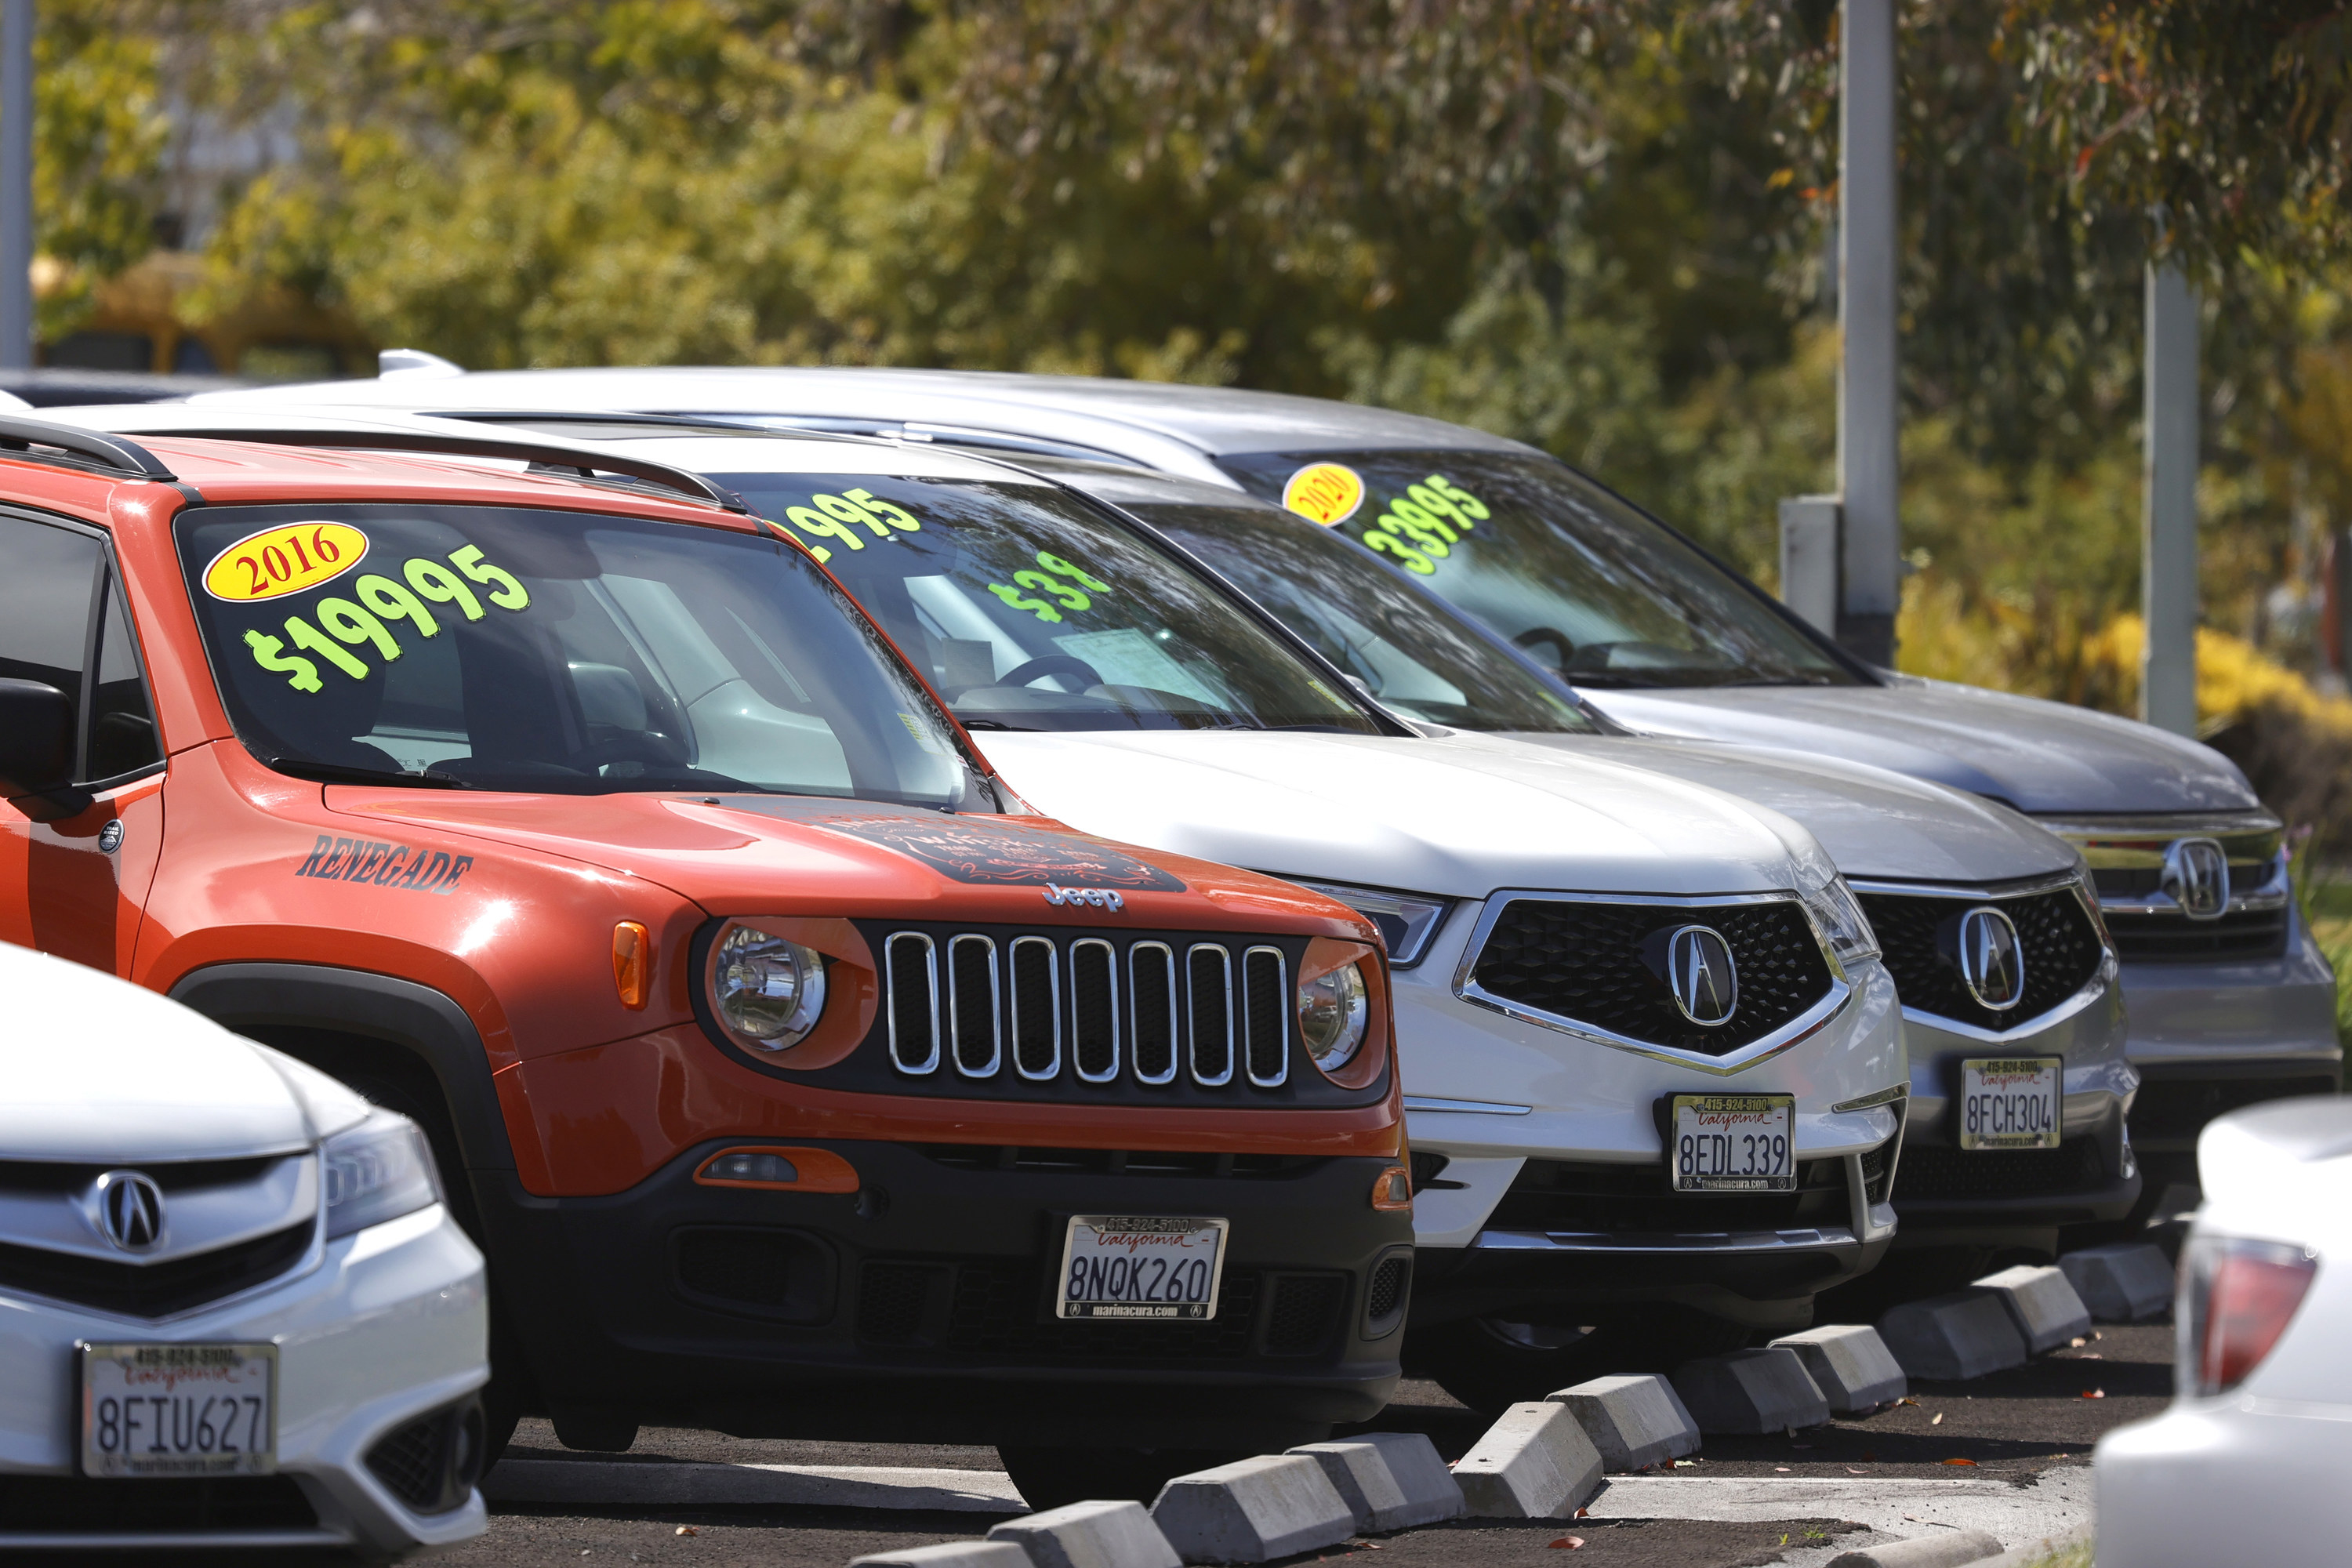 Used cars for sale with sticker prices on the windshields